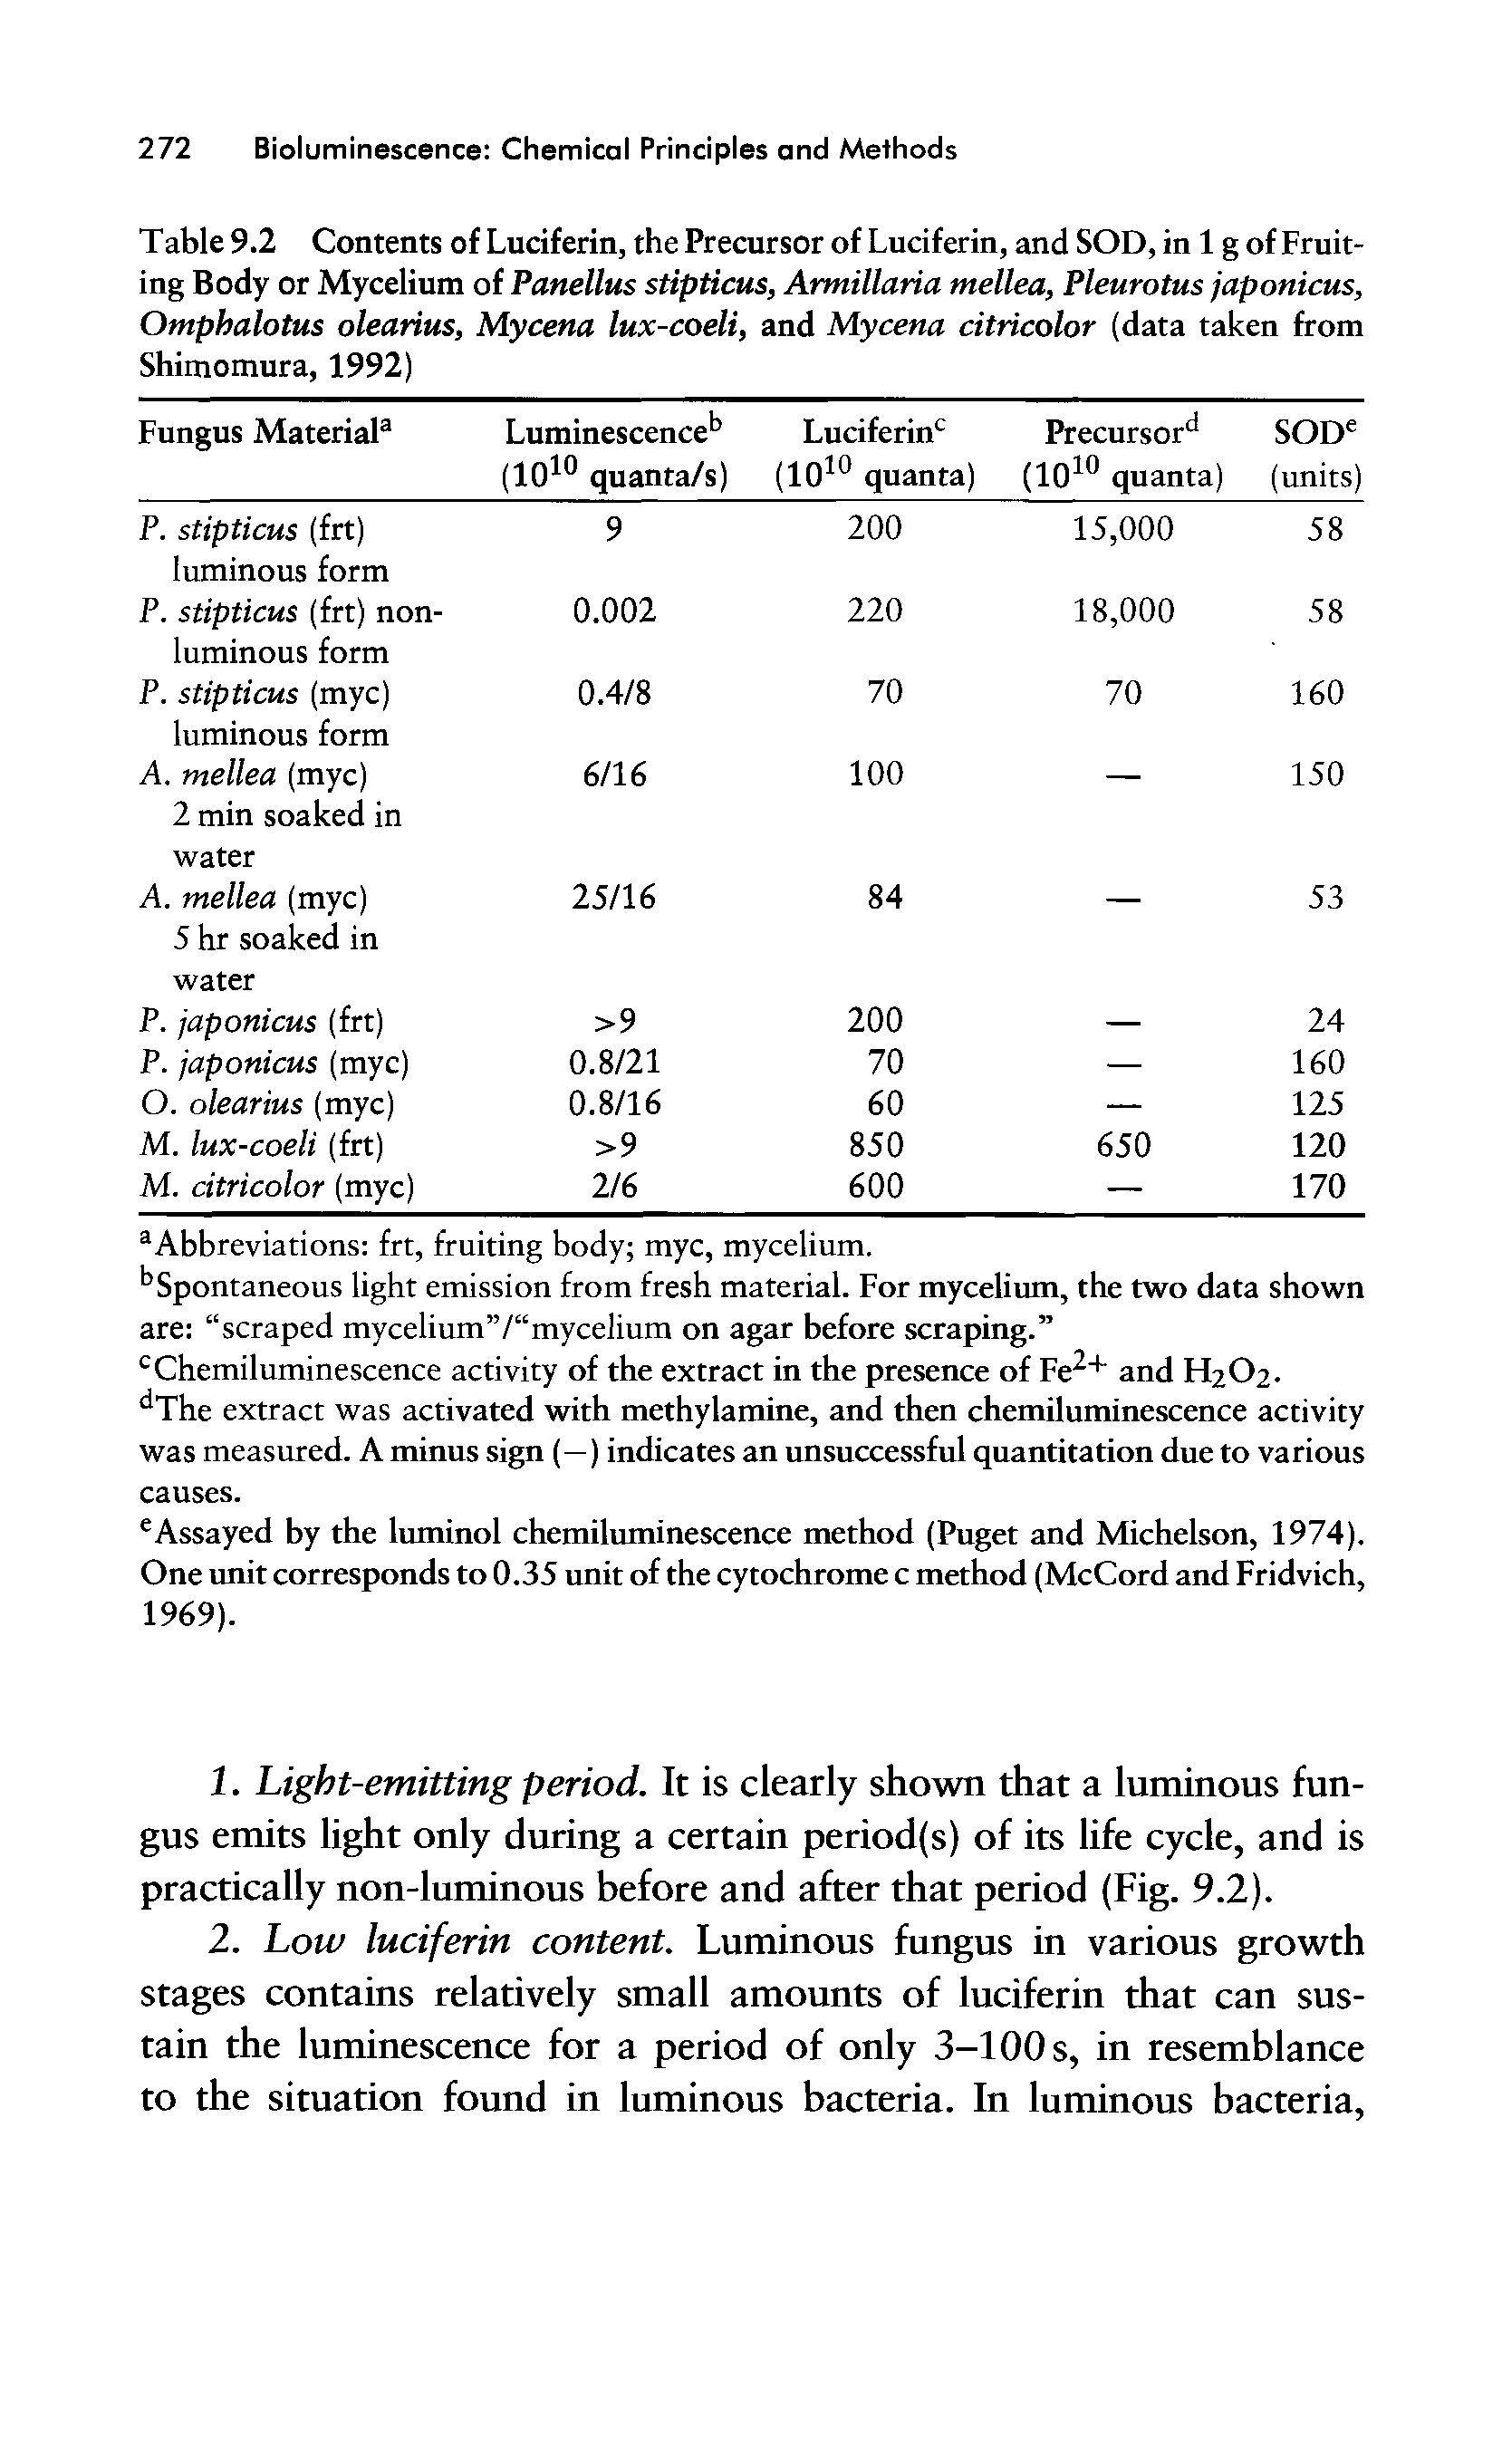 Table 9.2 Contents of Luciferin, the Precursor of Luciferin, and SOD, in 1 g of Fruiting Body or Mycelium of Panellus stipticus, Armillaria mellea, Pleurotus japonicus, Omphalotus olearius, Mycena lux-coeli, and Mycena citncolor (data taken from Shimomura, 1992)...